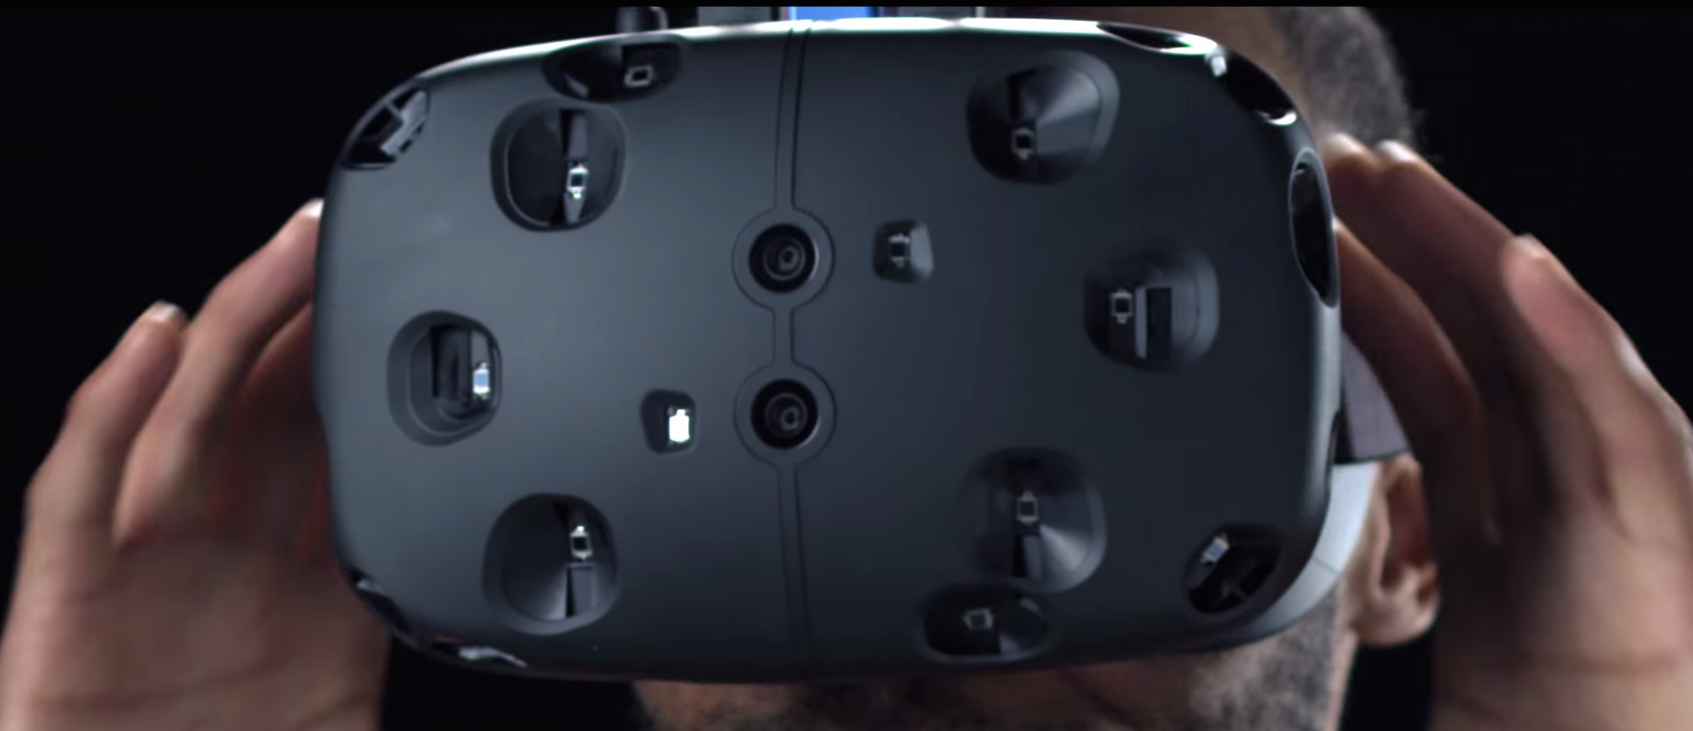 First HTC Vive / Steam VR Hands-On Preview Emerges "..it’s a massive